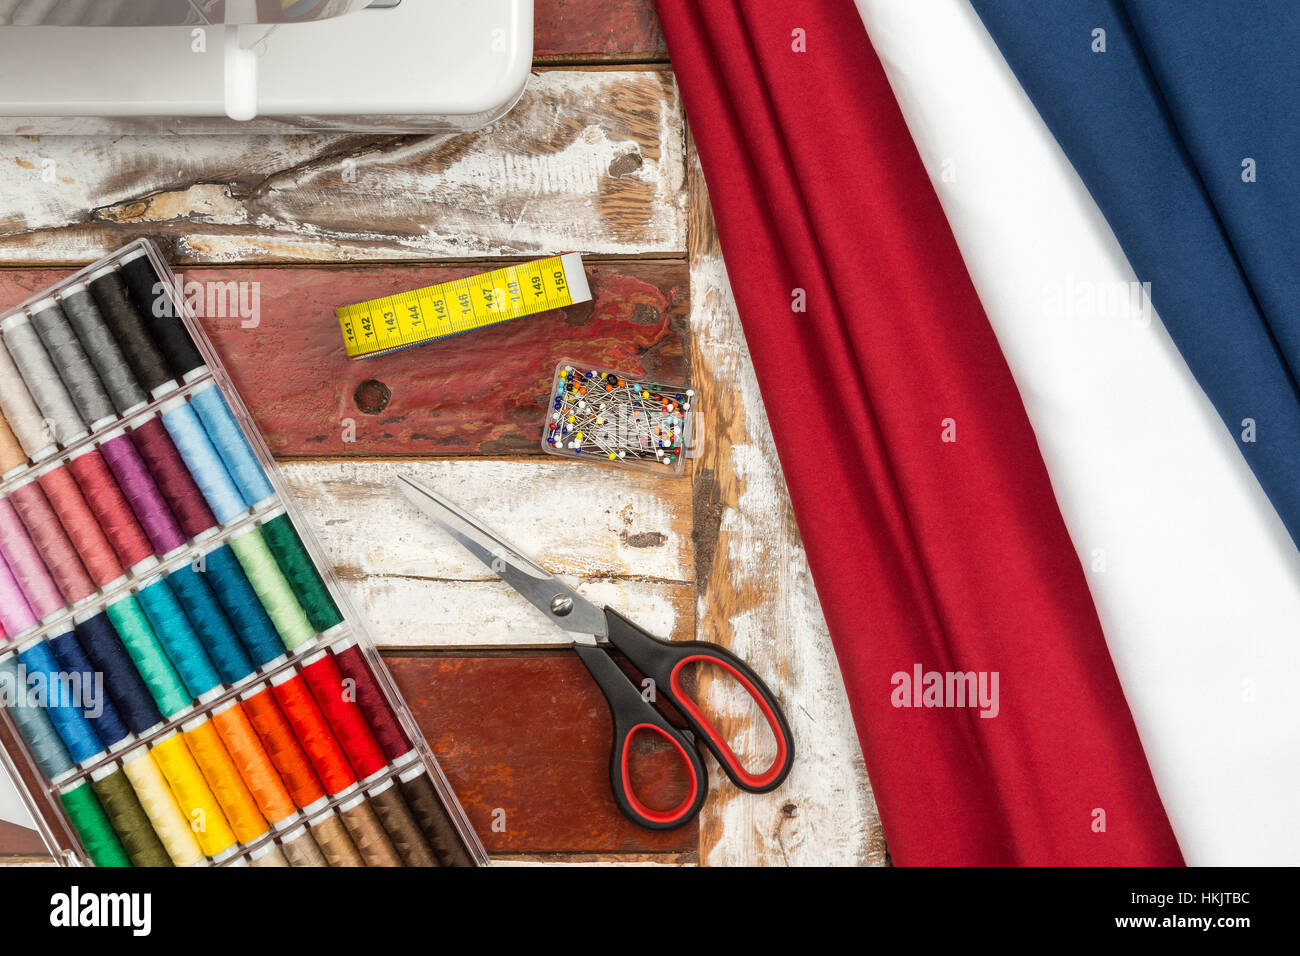 sewing machine blue white red fabric scissors box with colorful cottons measuring tape and pin needles on rustic wooden table Stock Photo